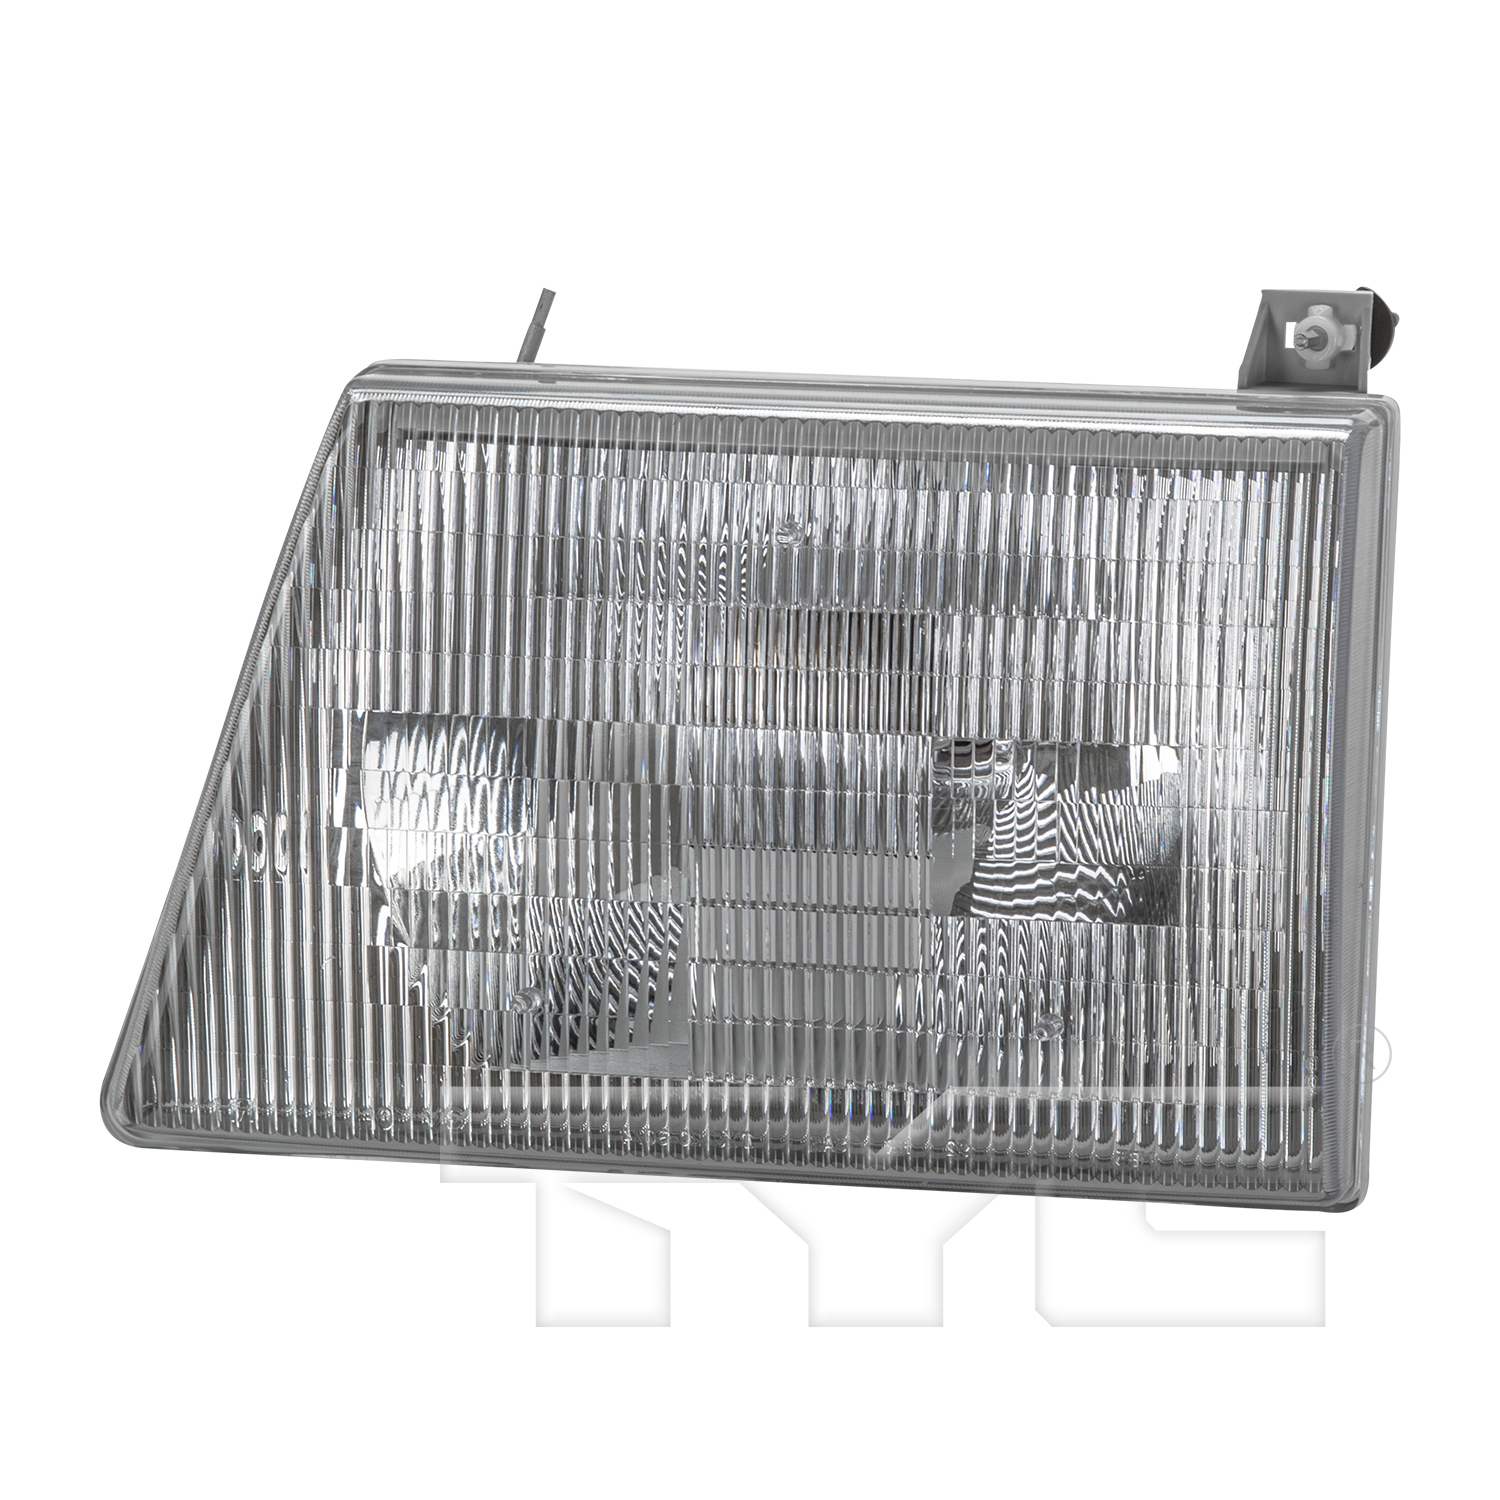 Aftermarket HEADLIGHTS for FORD - E-150 ECONOLINE CLUB WAGON, E-150 ECONOLINE CLUB WAGON,92-96,LT Headlamp assy composite